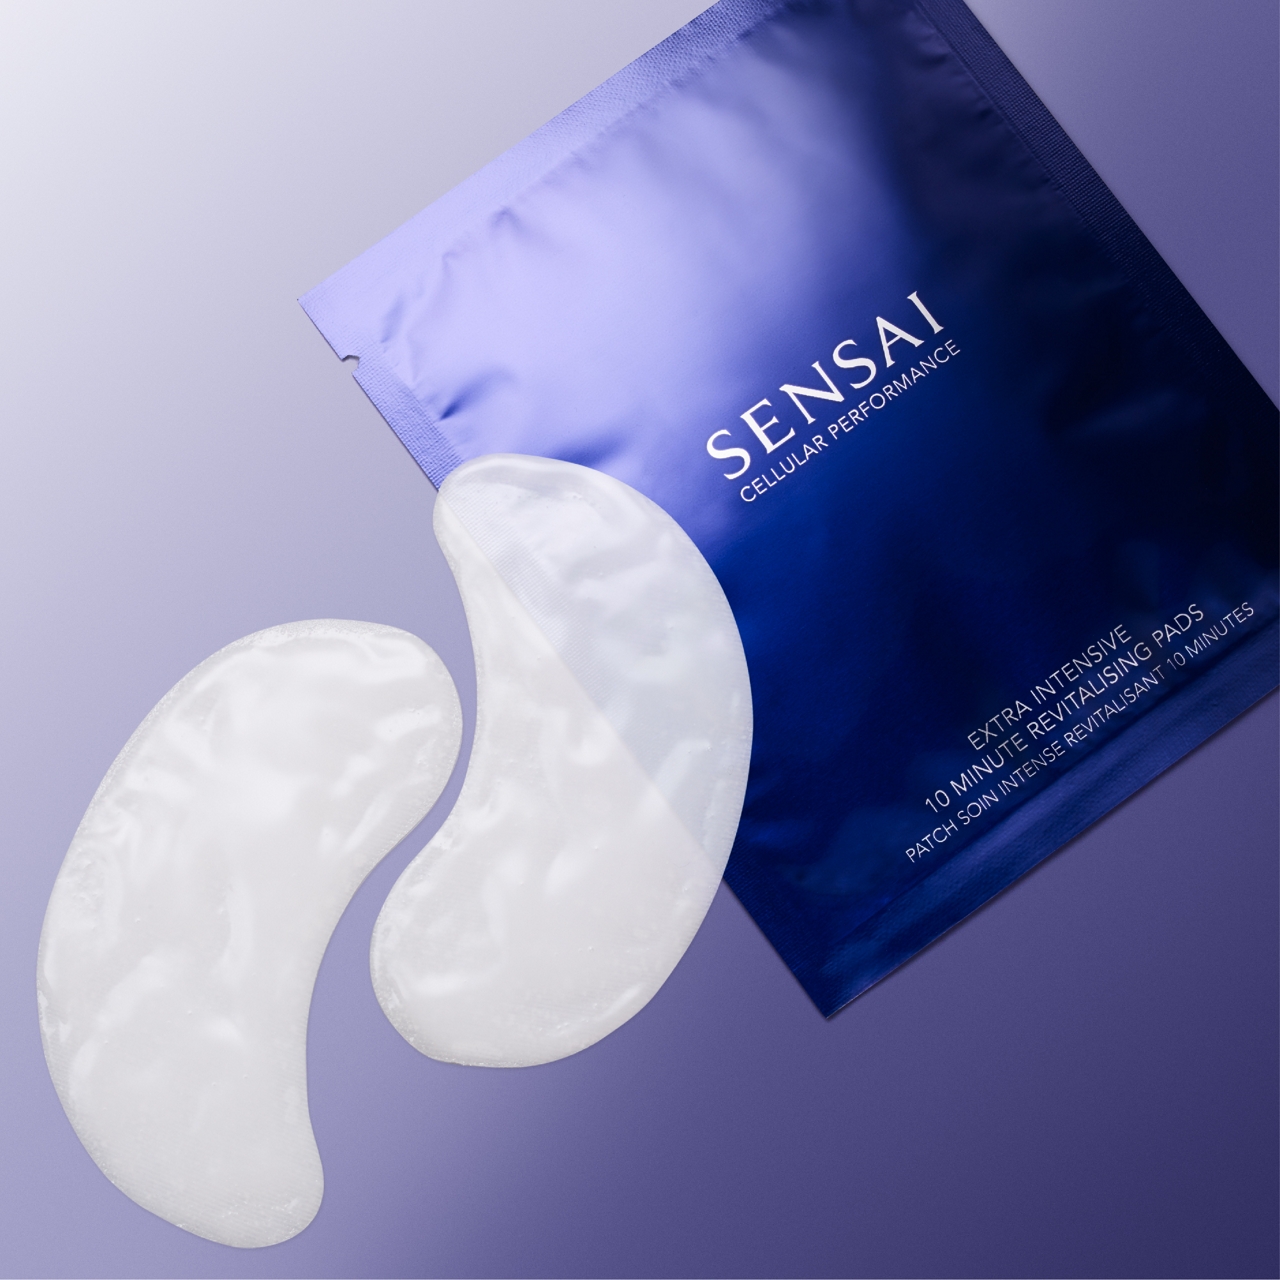 Extra intensive 10 minute revitalising pads